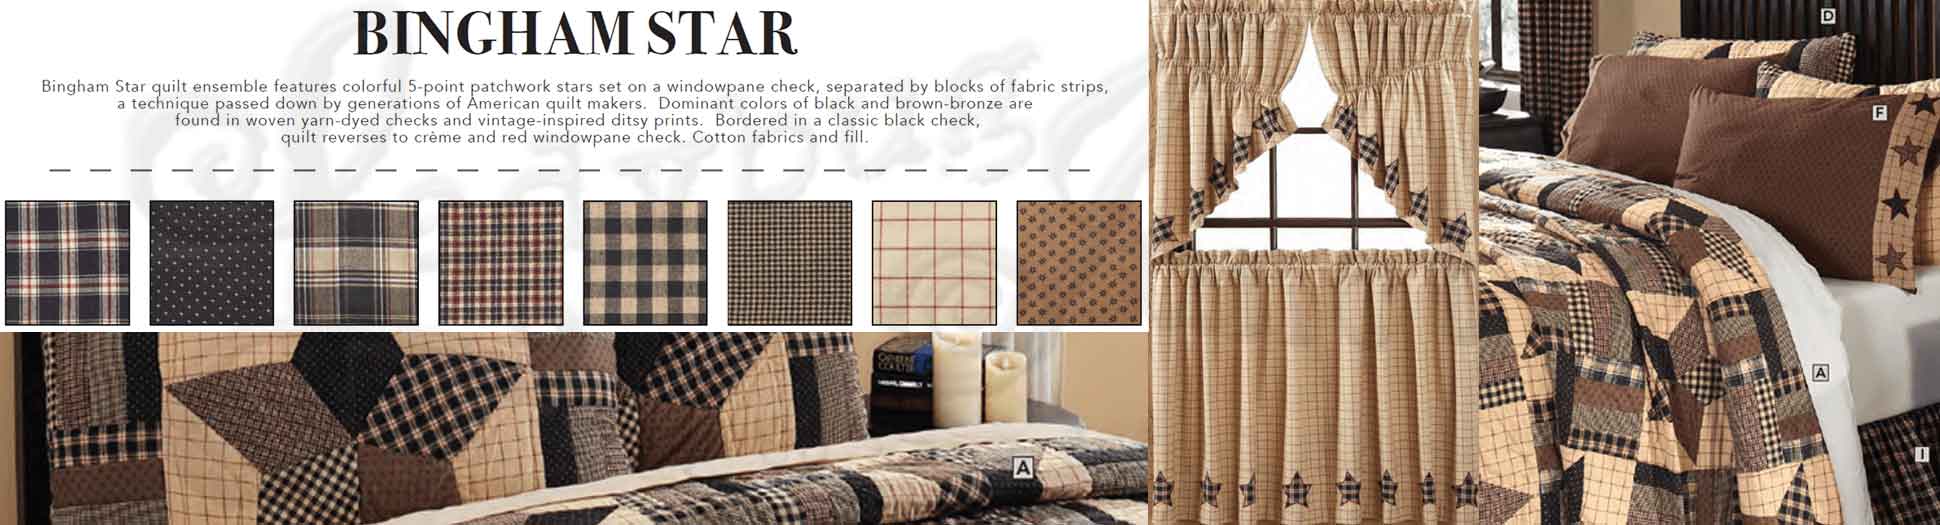 Bingham Star Bed, Bath and Window Curtains by VHC Brands